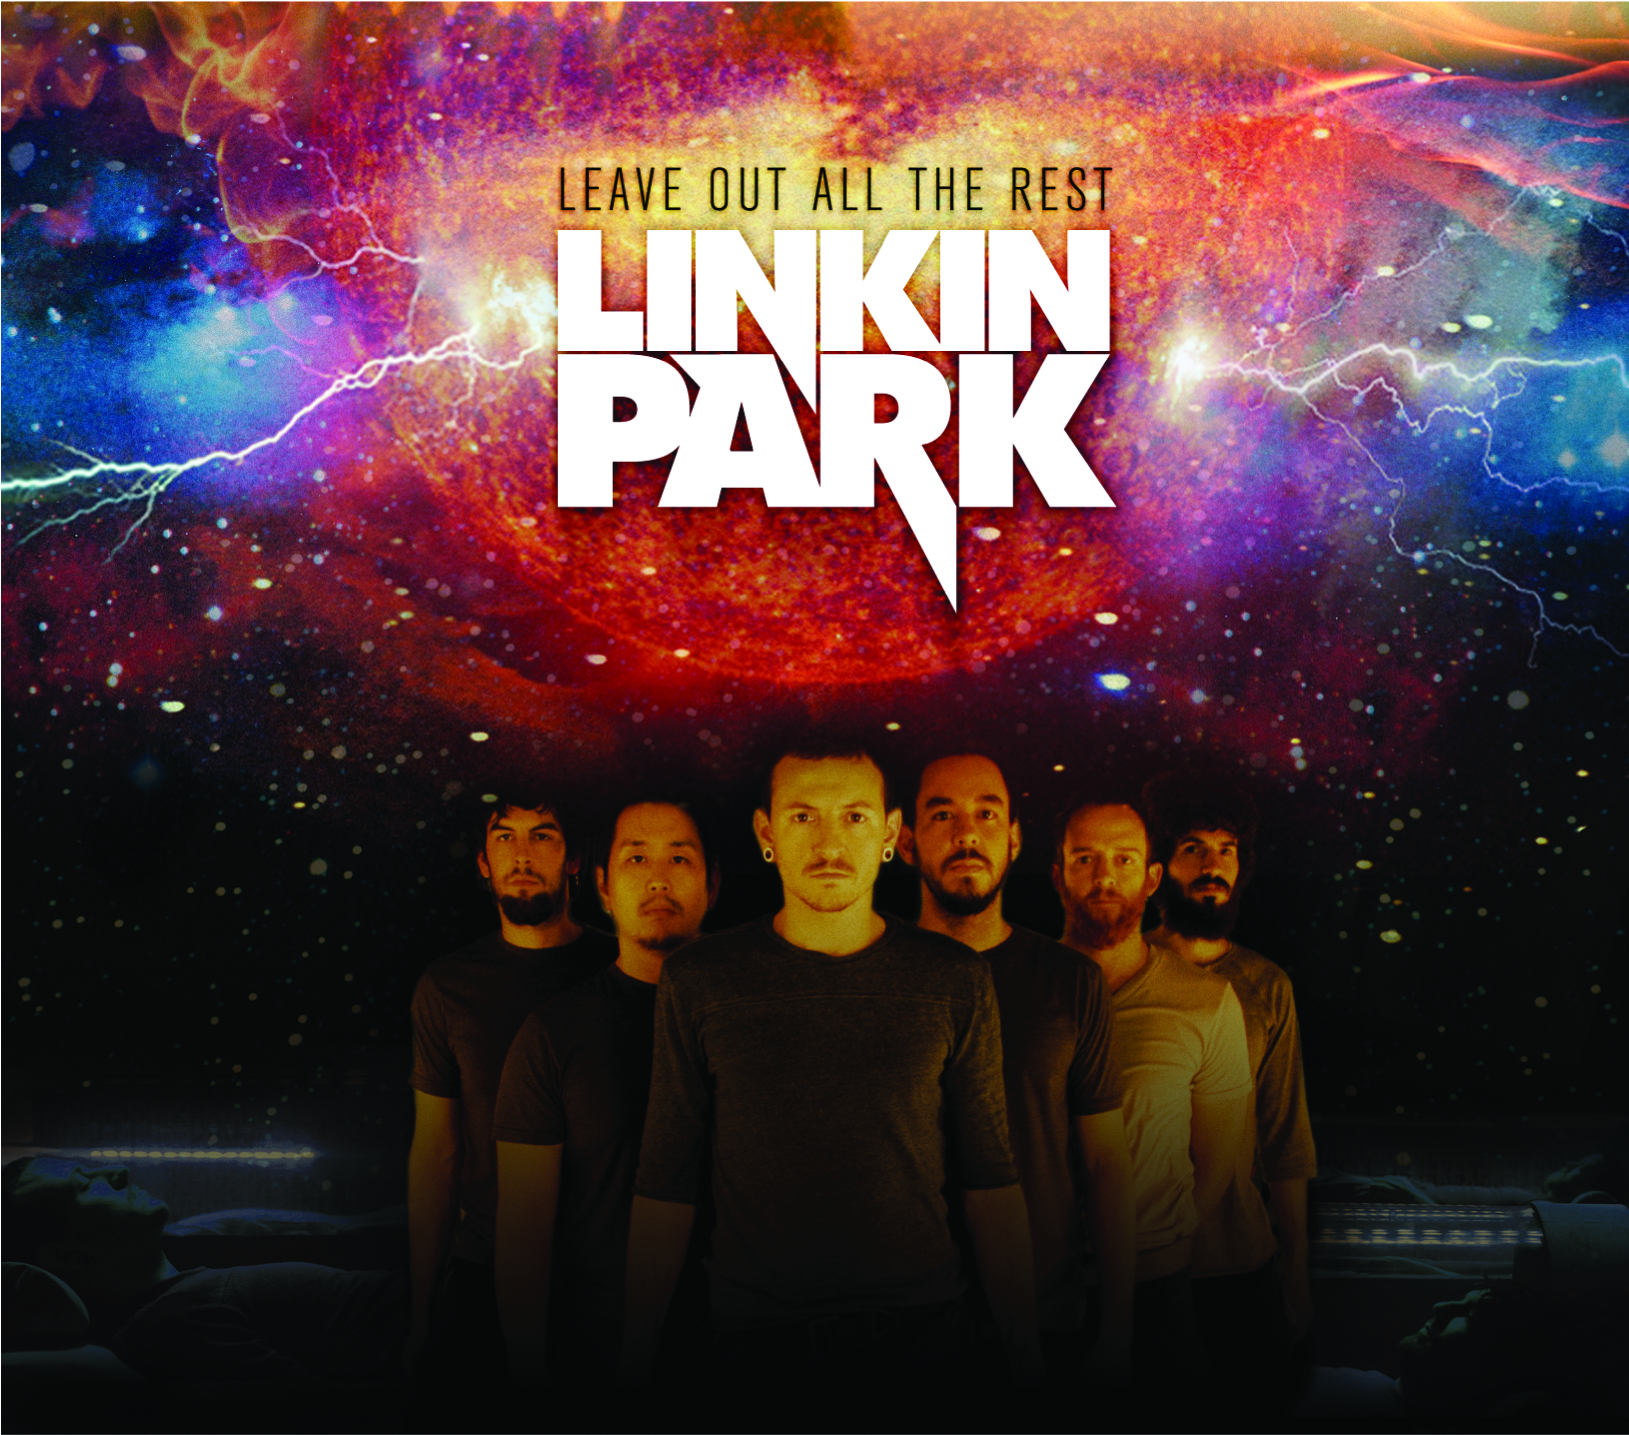 leave out all the rest (official video) linkin park